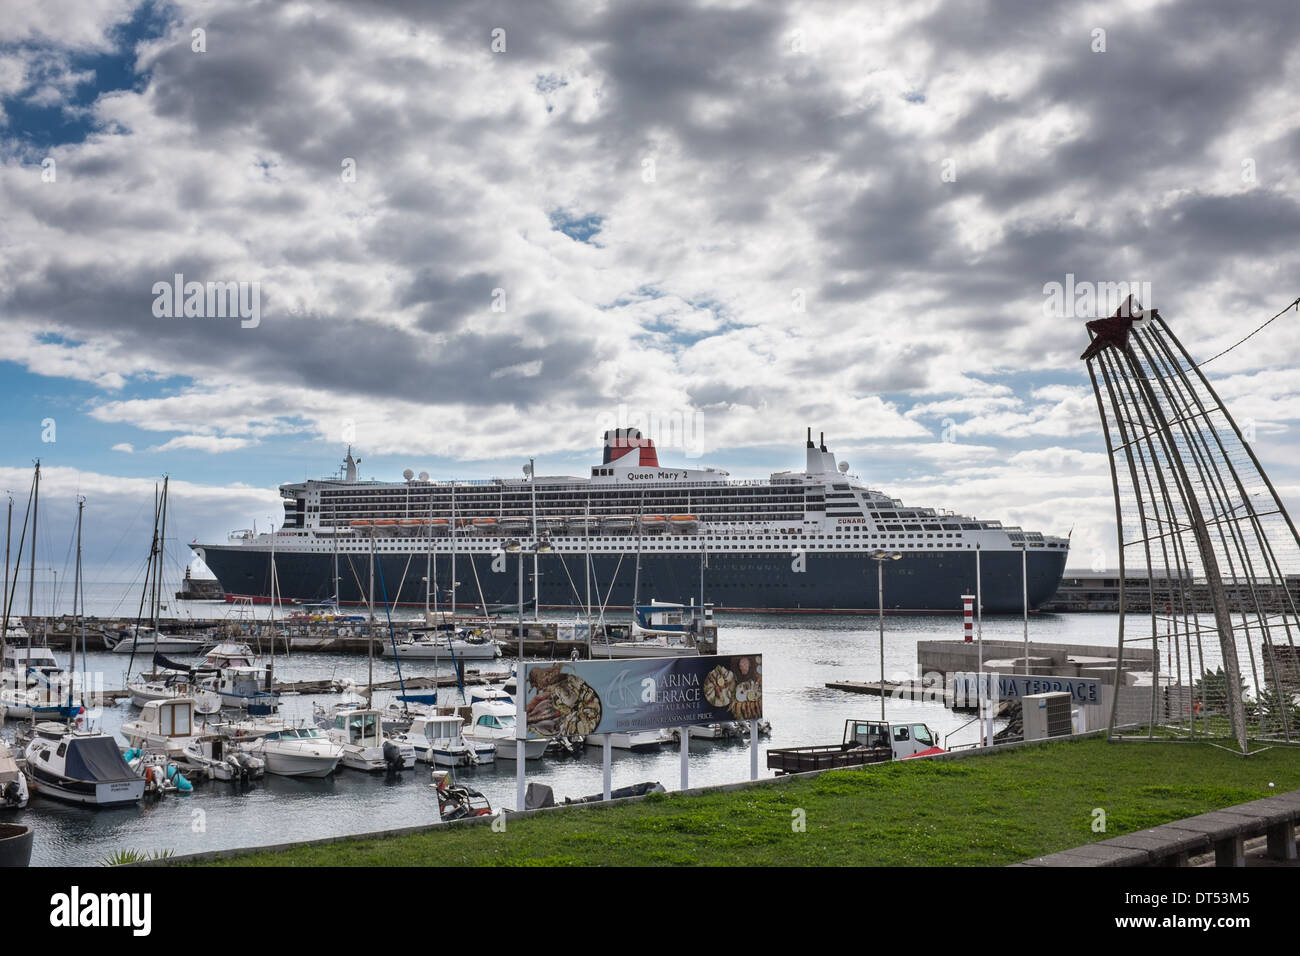 The Queen Mary 2 Ocean Liner, Berthed in Madeira, Portugal. Stock Photo